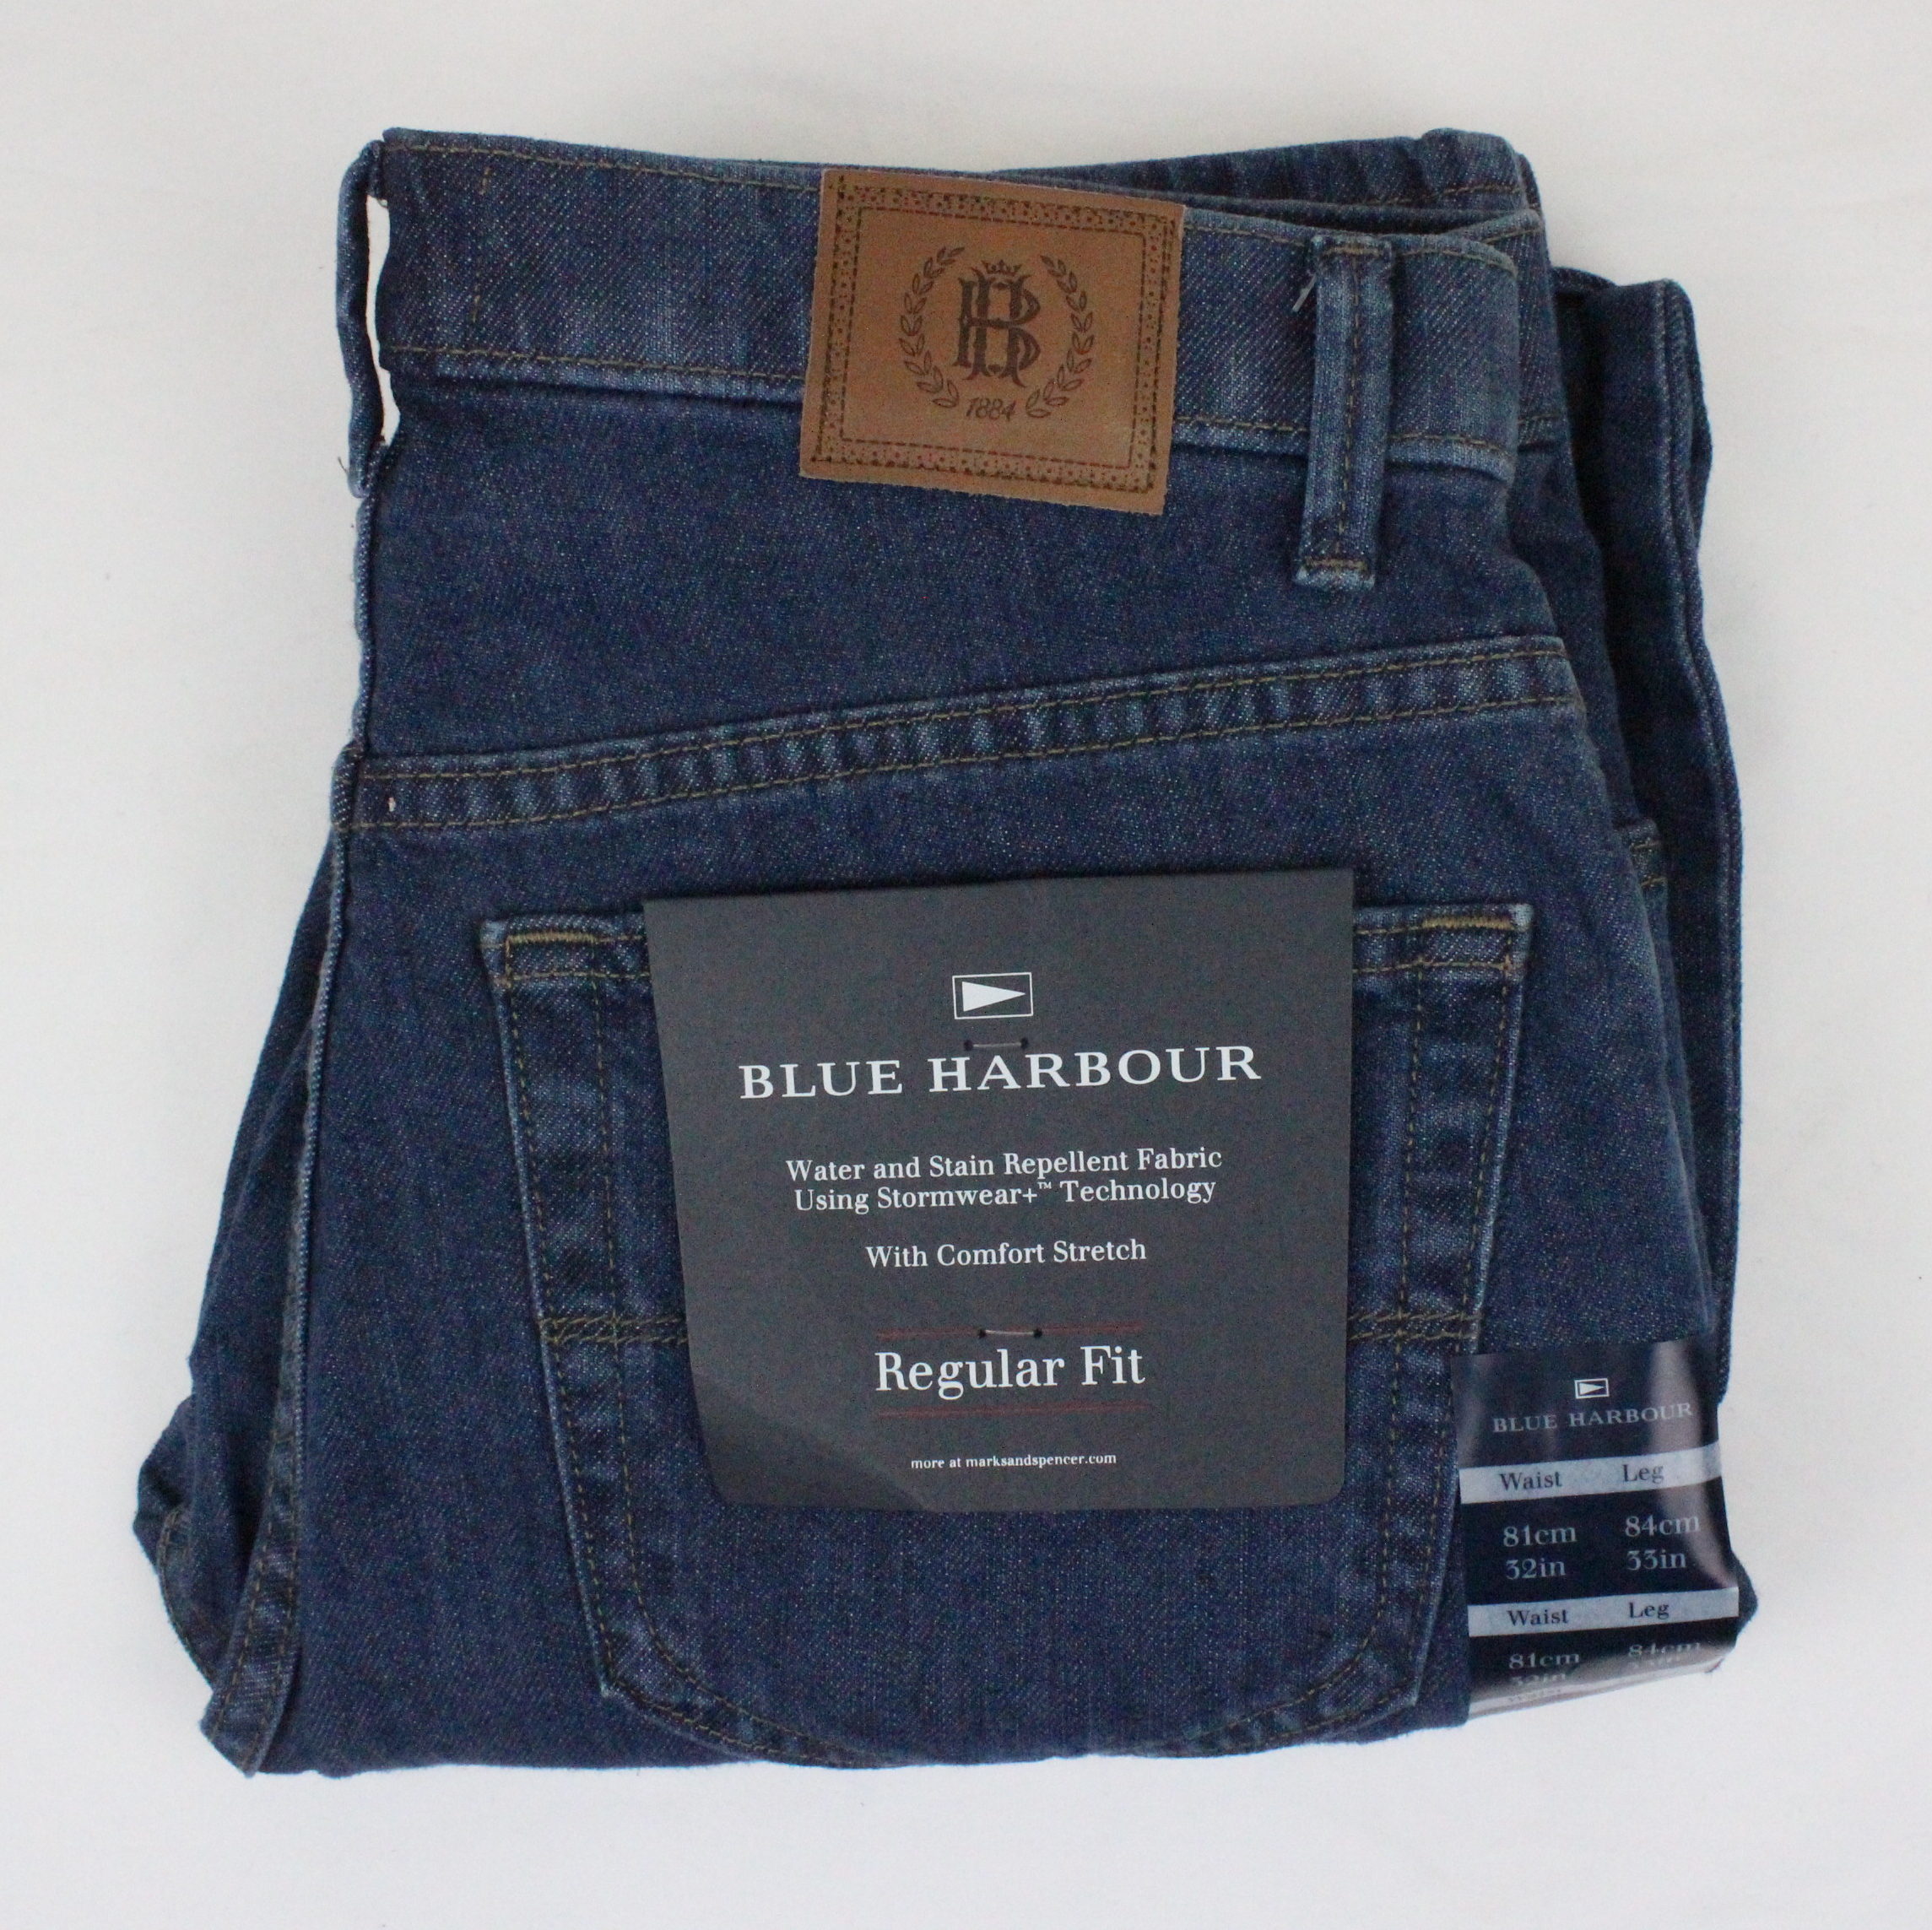 marks and spencer jeans